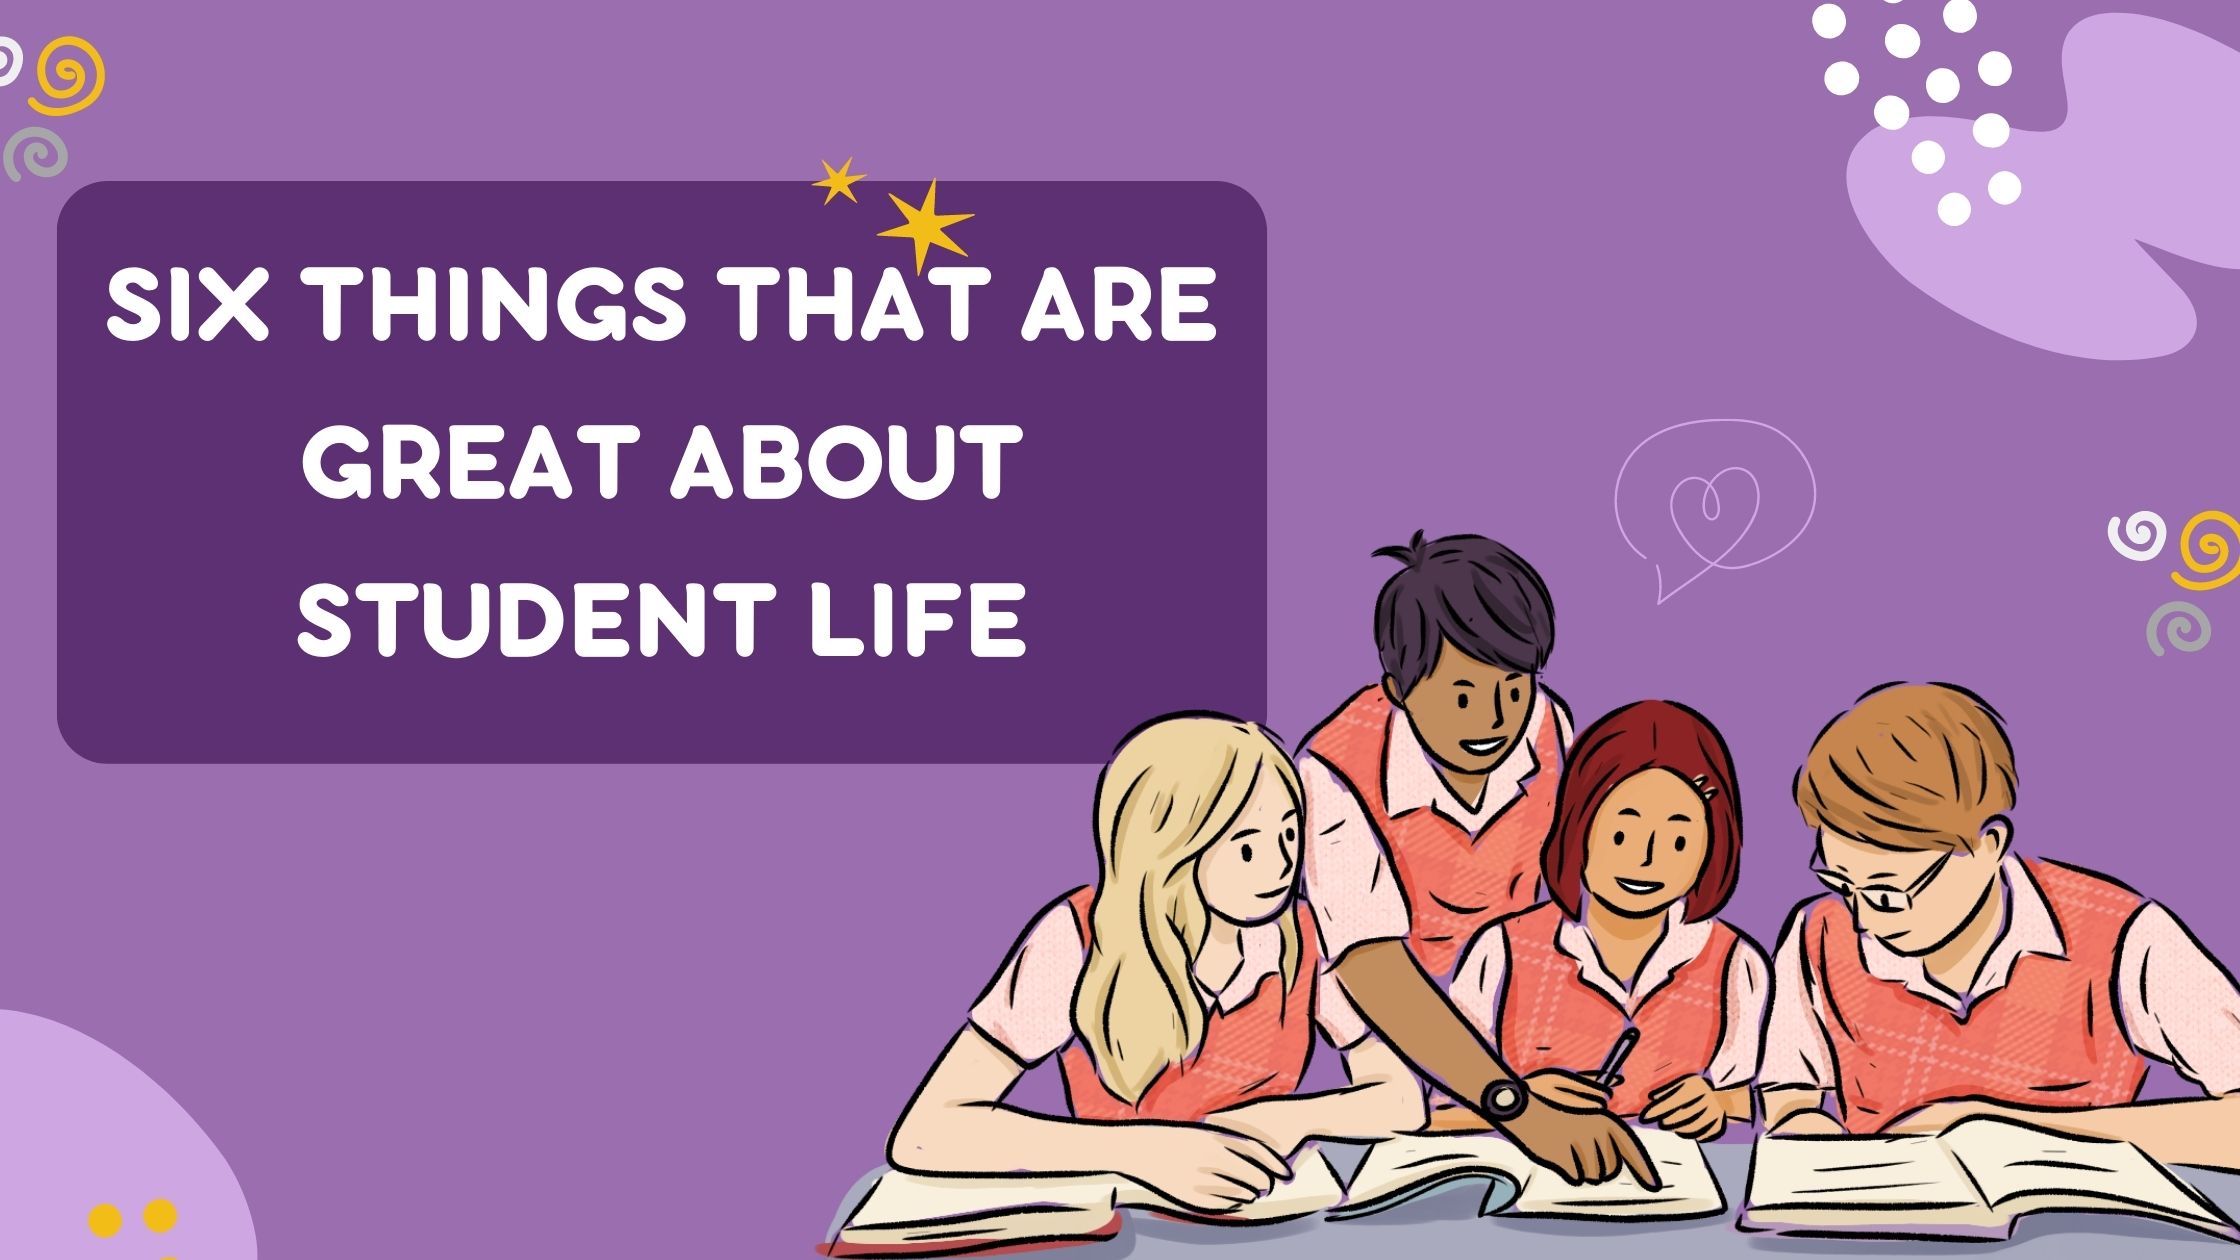 Six things that are great about student life